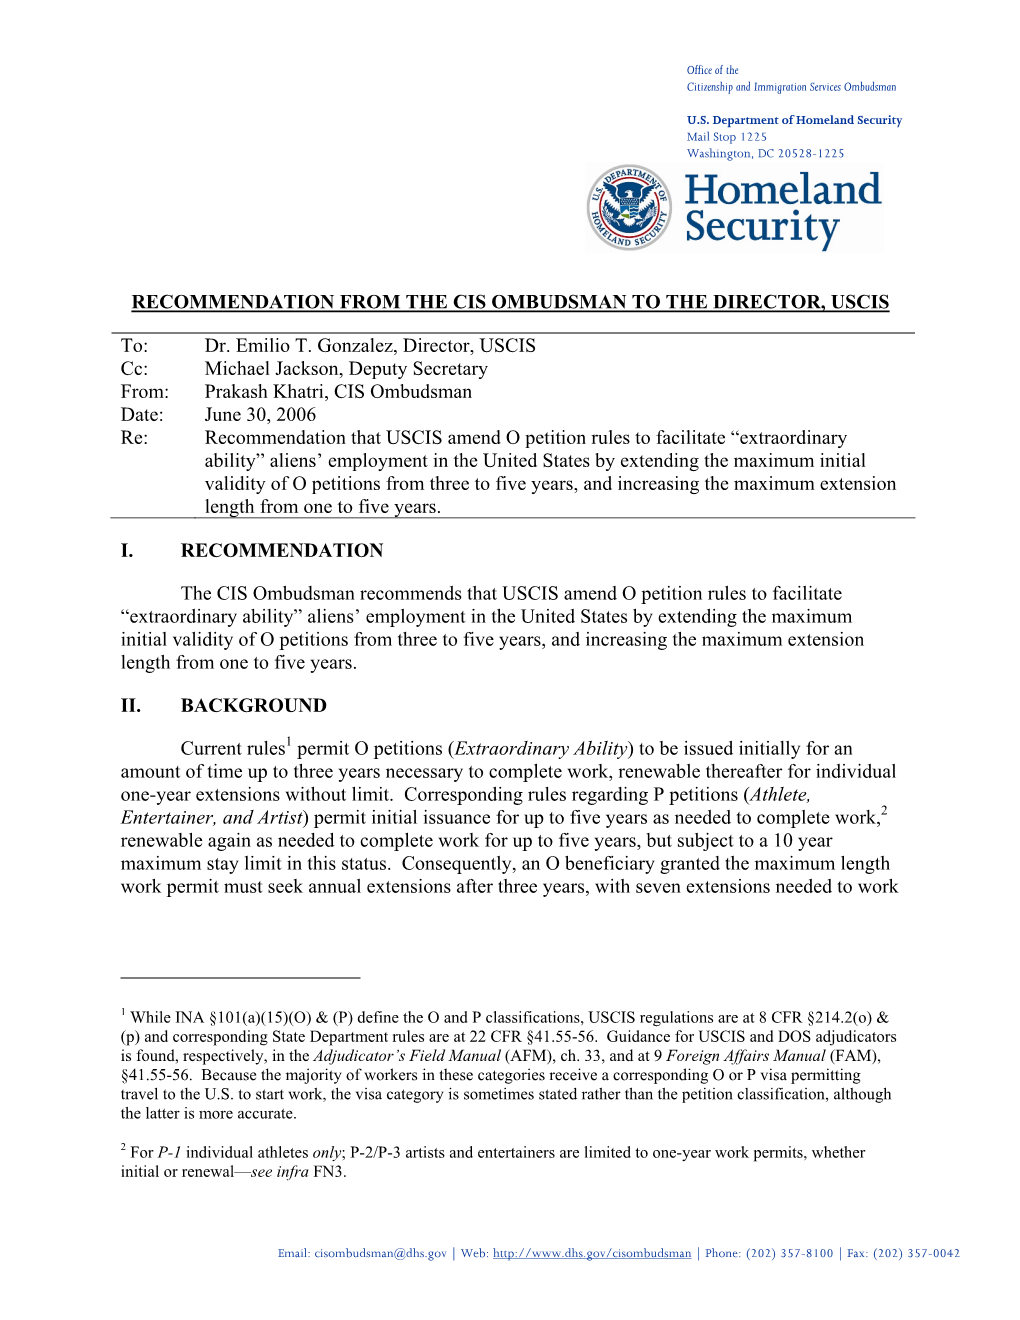 Recommendation to USCIS to Amend O Petition